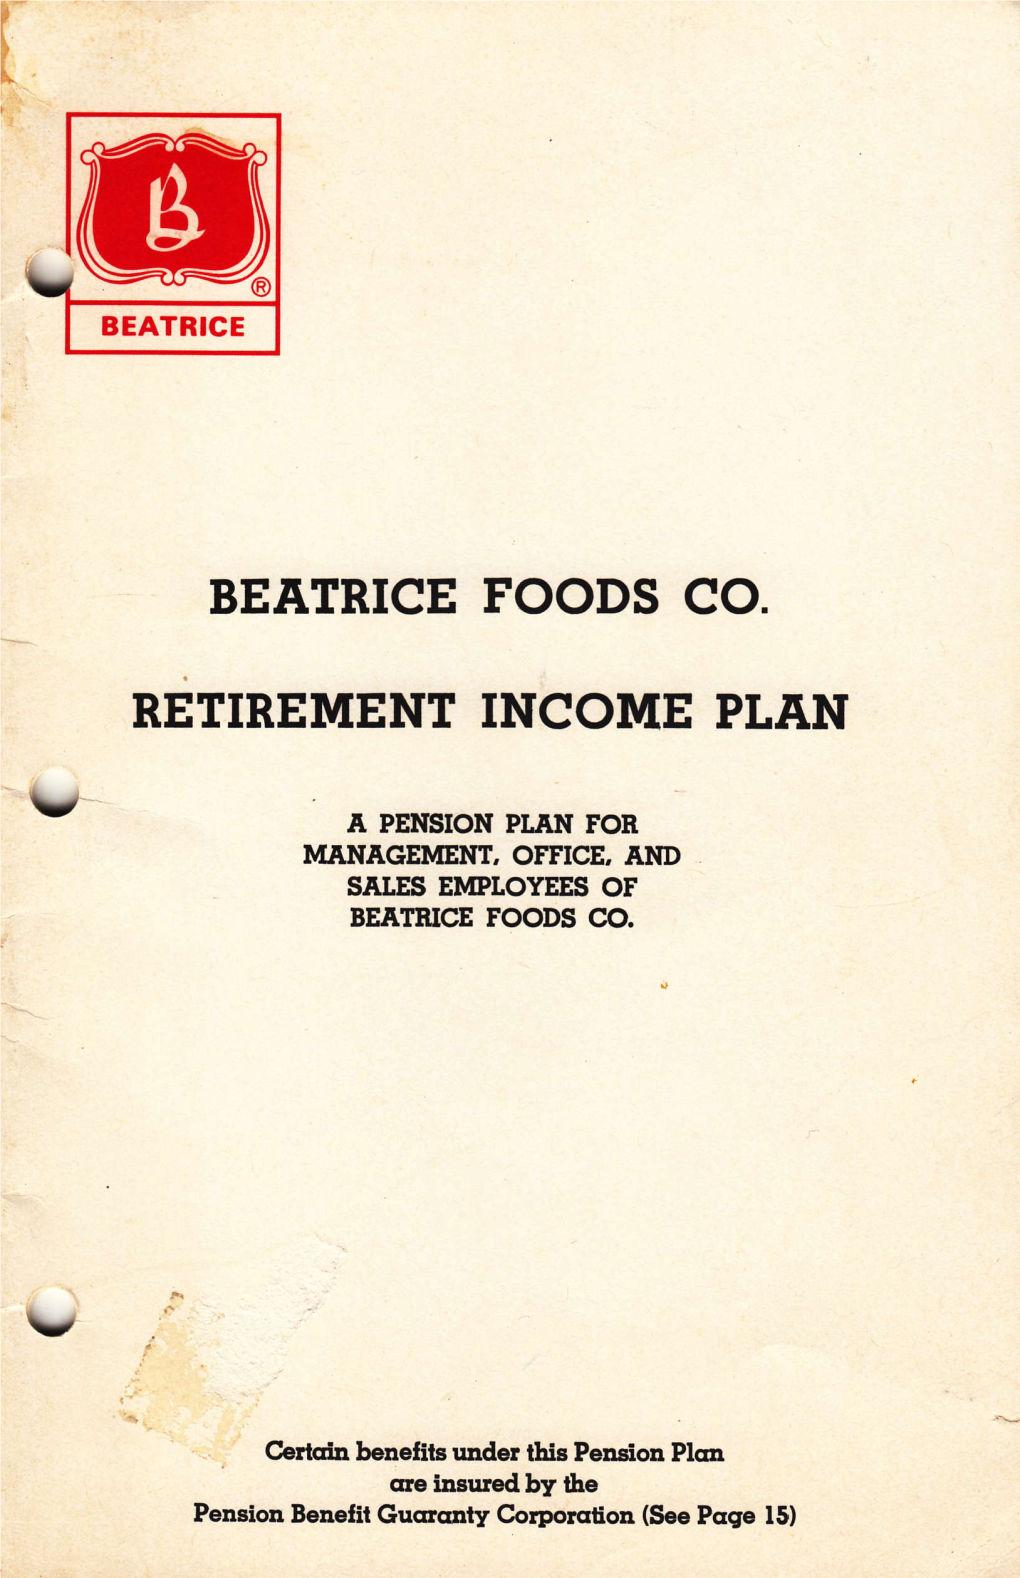 Beatrice Foods Co. Retirement Income Plan